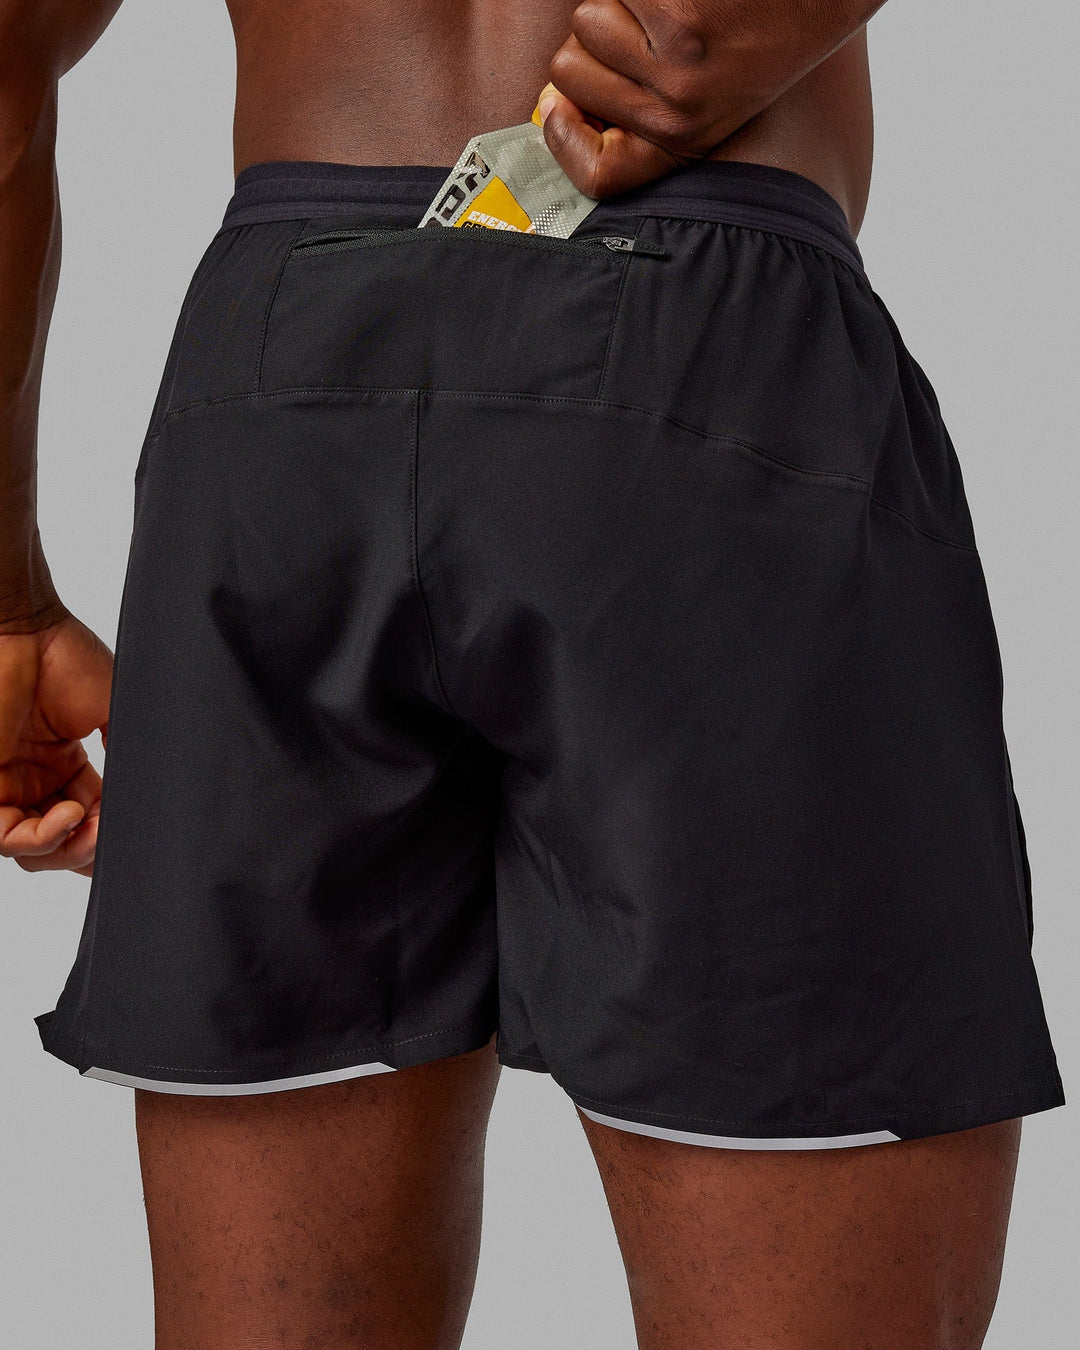 Pace 5" Lined Performance Shorts - Black-Reflective